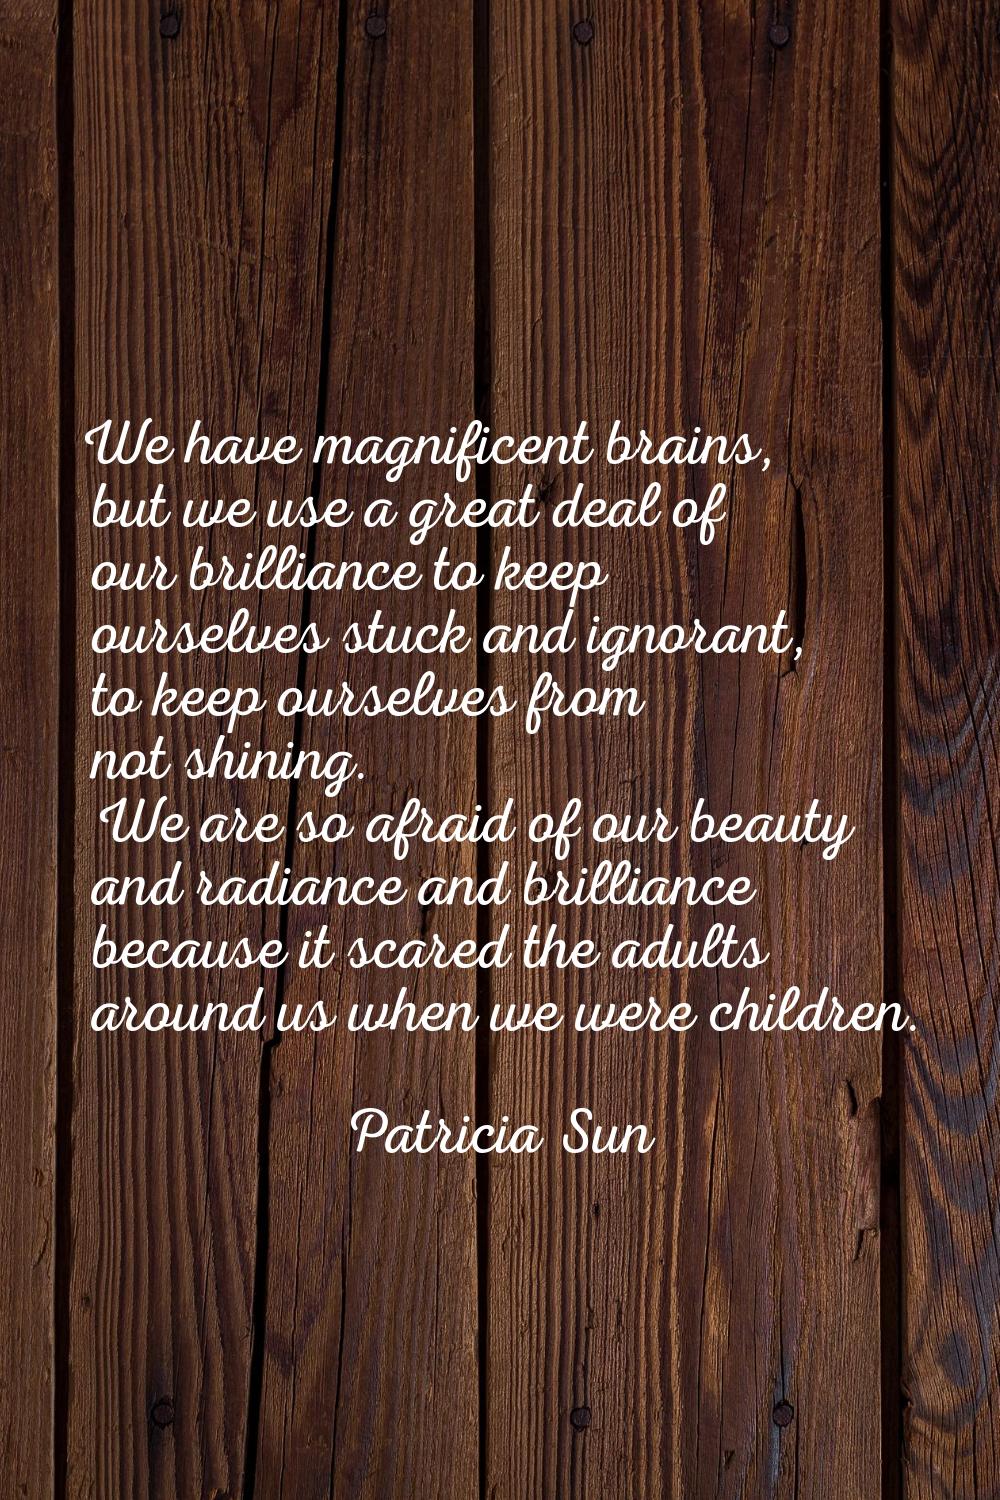 We have magnificent brains, but we use a great deal of our brilliance to keep ourselves stuck and i